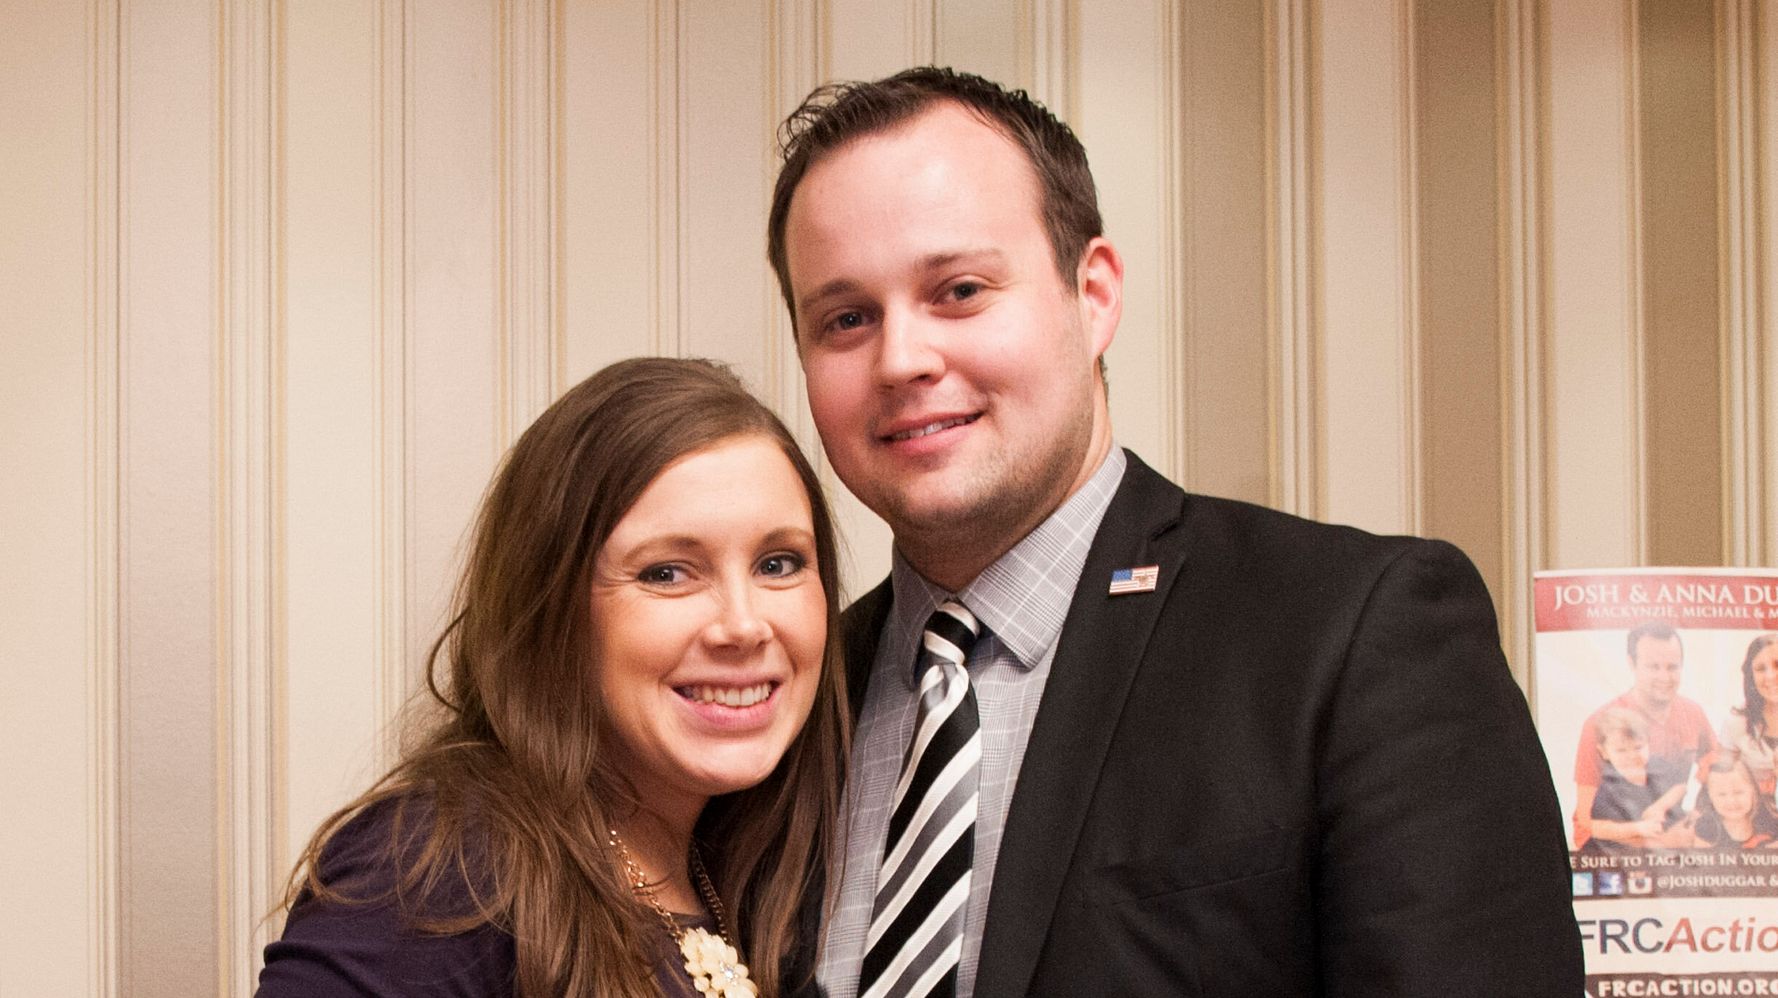 Josh Duggar's Cousin Tells His Wife 'There Is No Shame' In Divorce